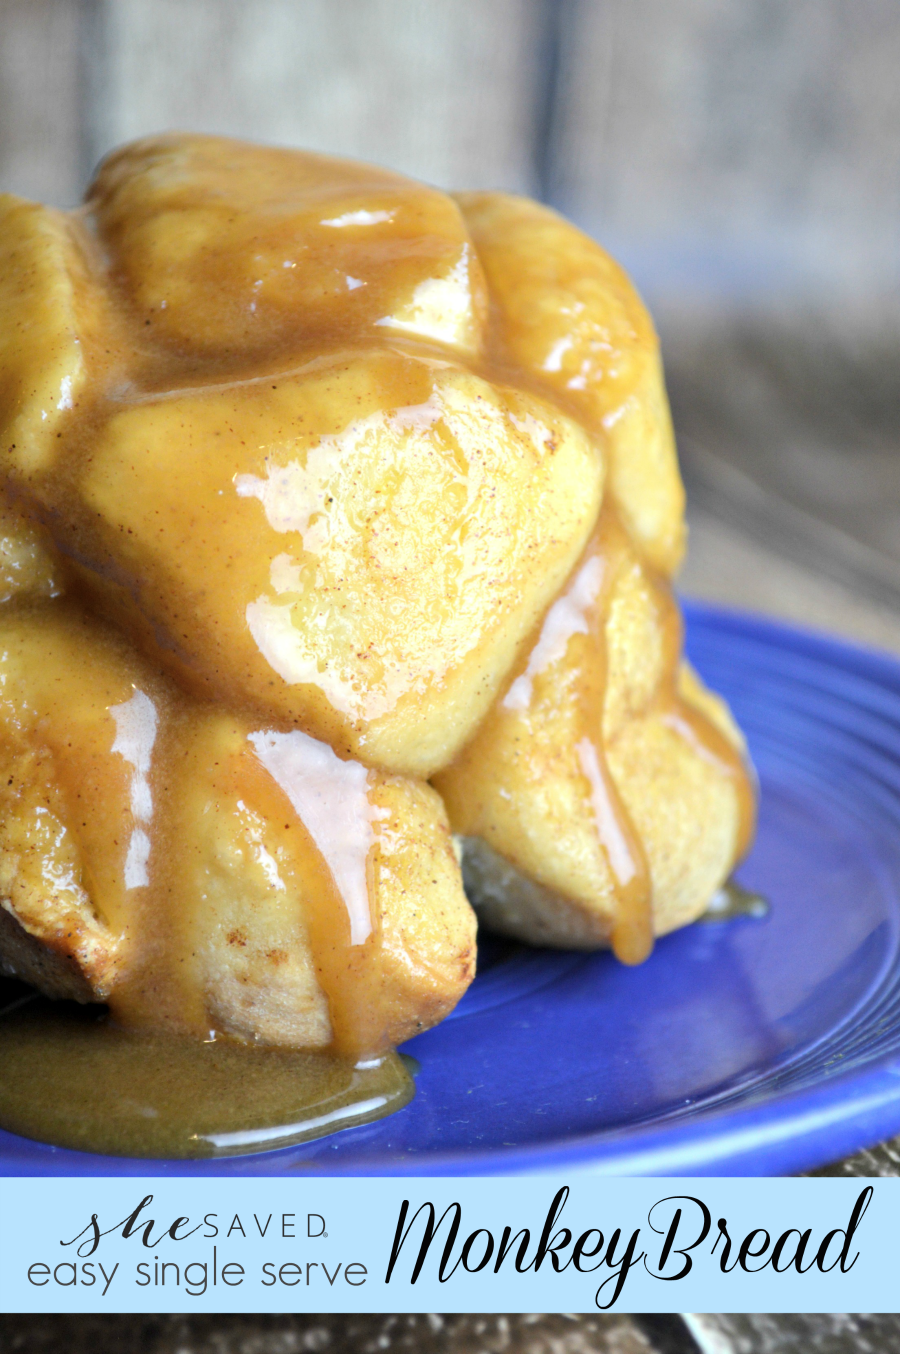 A fun twist on an old favorite, this single servie Easy Monkey Bread Recipe is one of our favorites for breakfast and the kids LOVE to help make it!